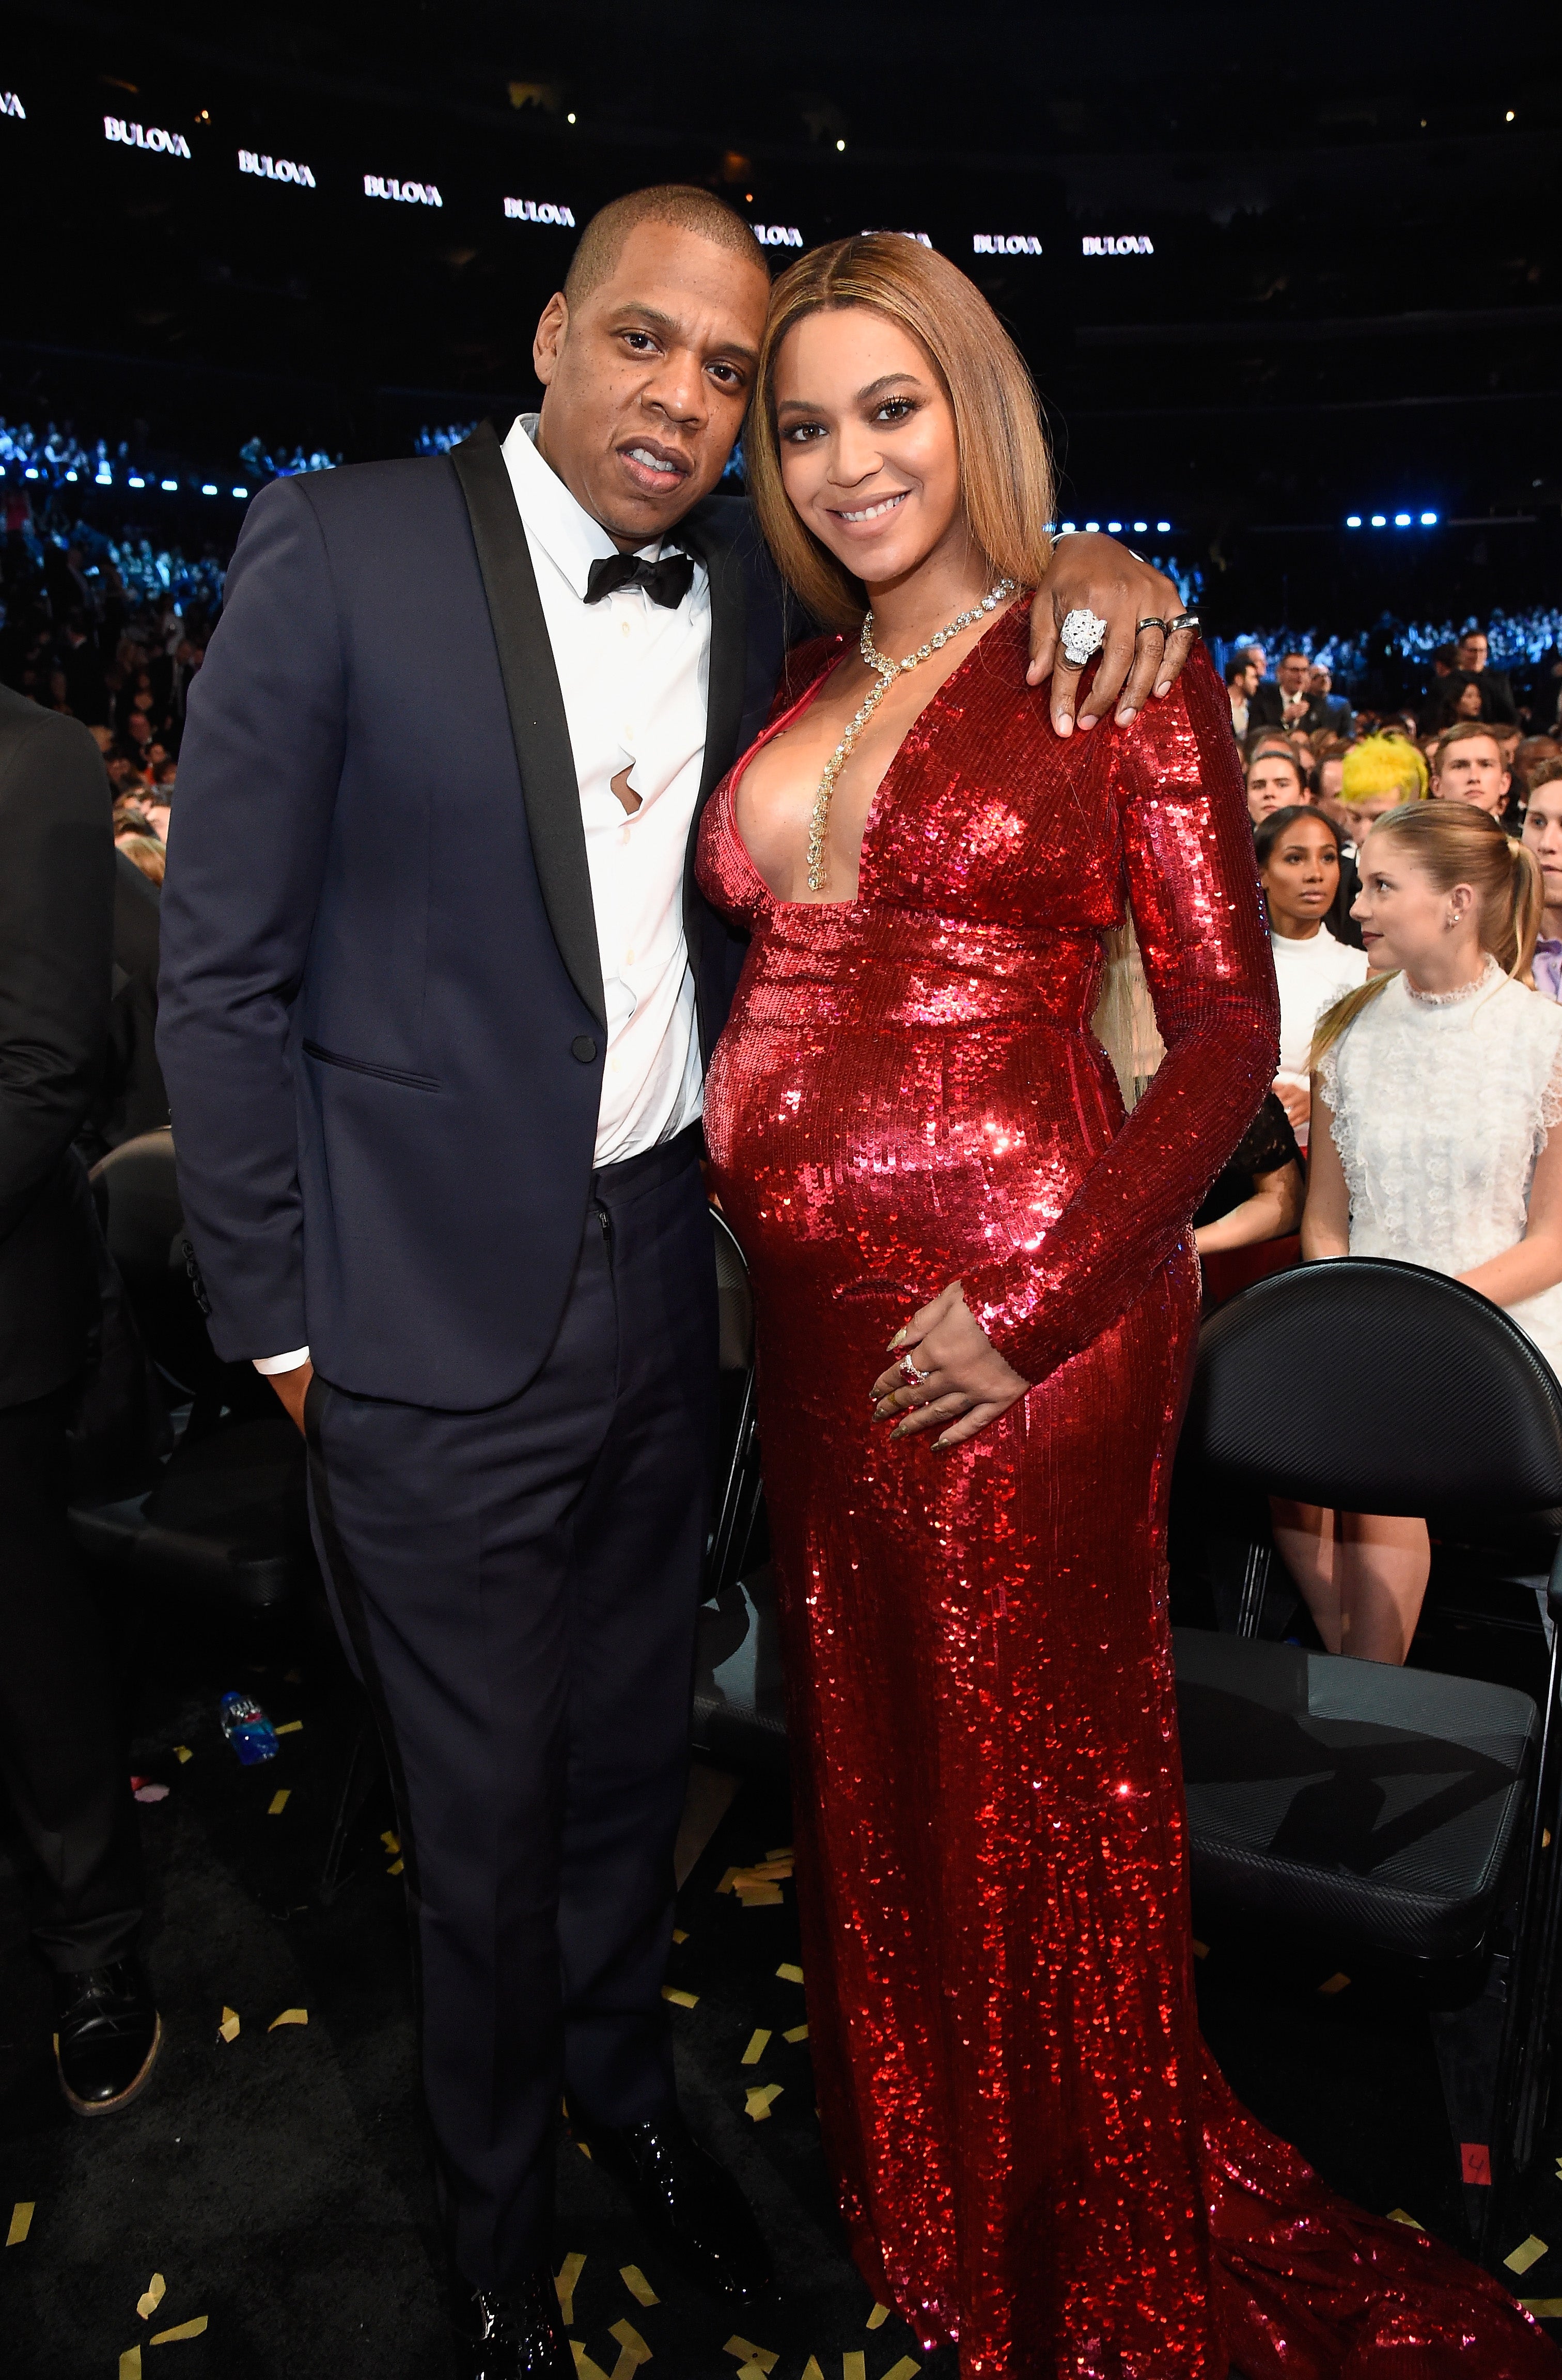 What You May Have Missed: Bow Wow Gets Chased And Bey And Jay’s Million-Dollar Maternity Ward
